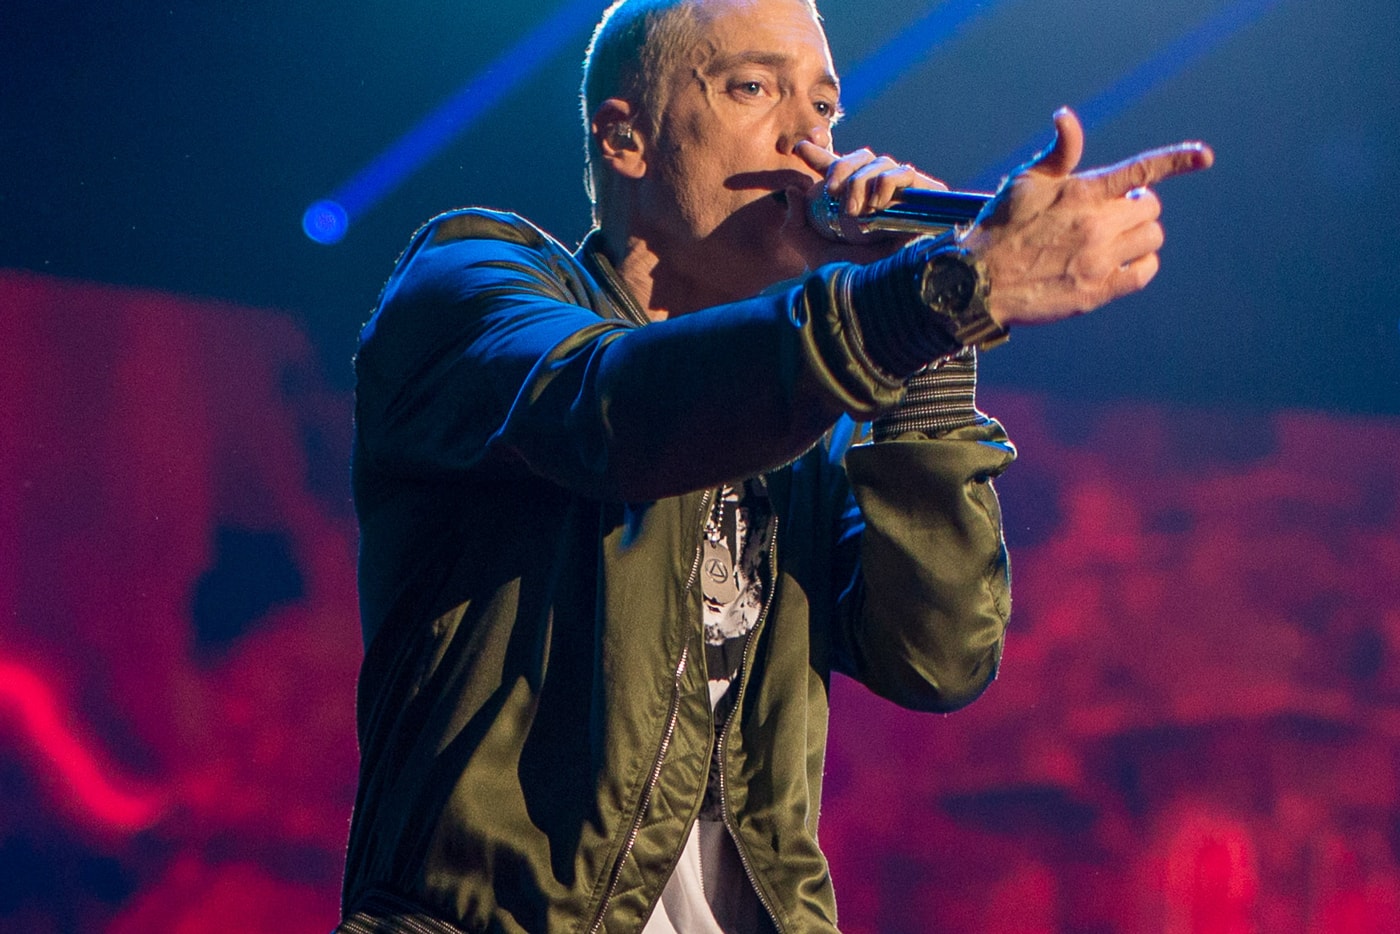 mocking bird eminem, the one song by him I actually like